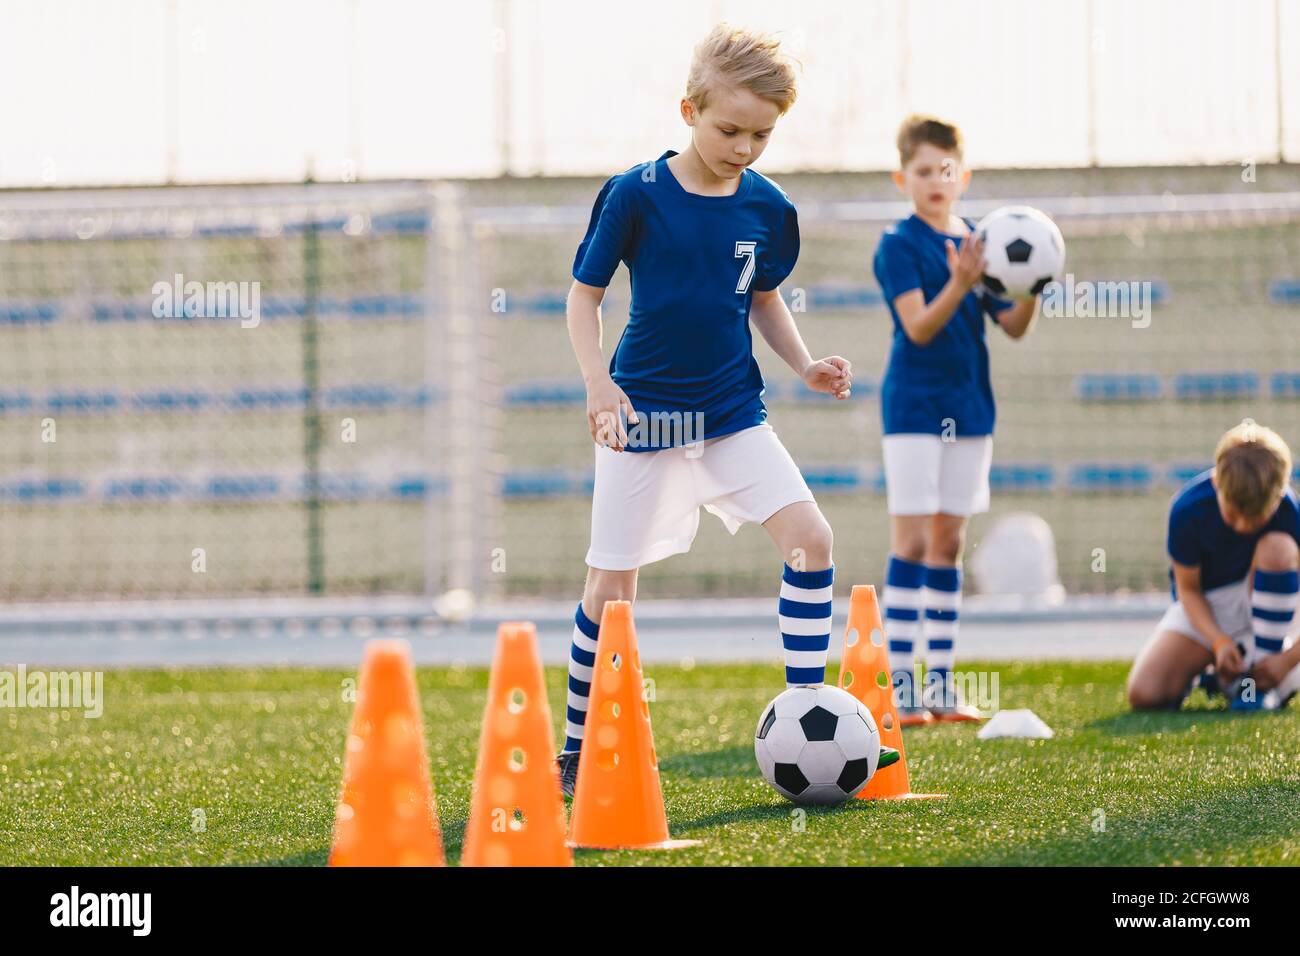 Young boys kicking soccer ball on training. Children practicing football on school grass pitch. Happy blonde boy running after soccer ball and trainin Stock Photo